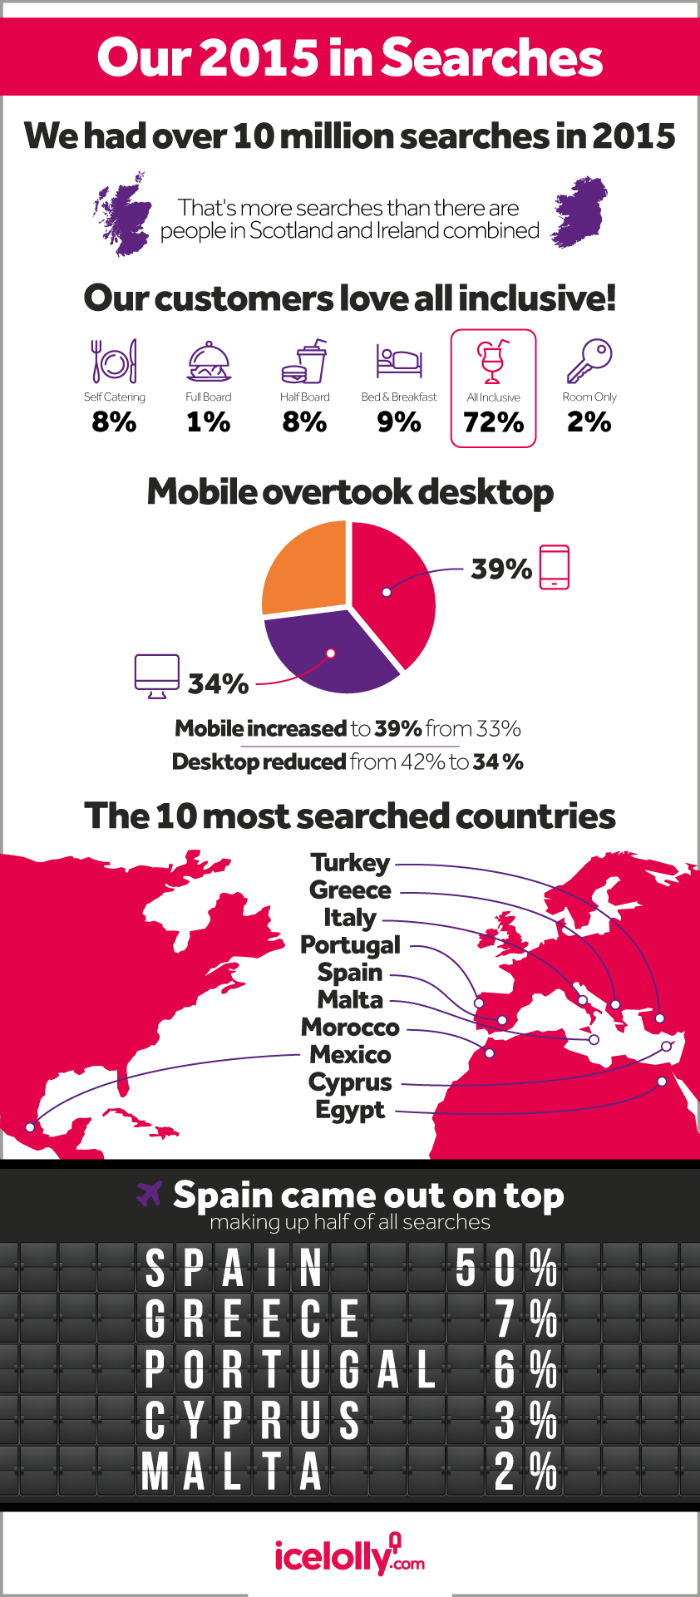 icelolly.com's year 2015 in holiday searches-infographic